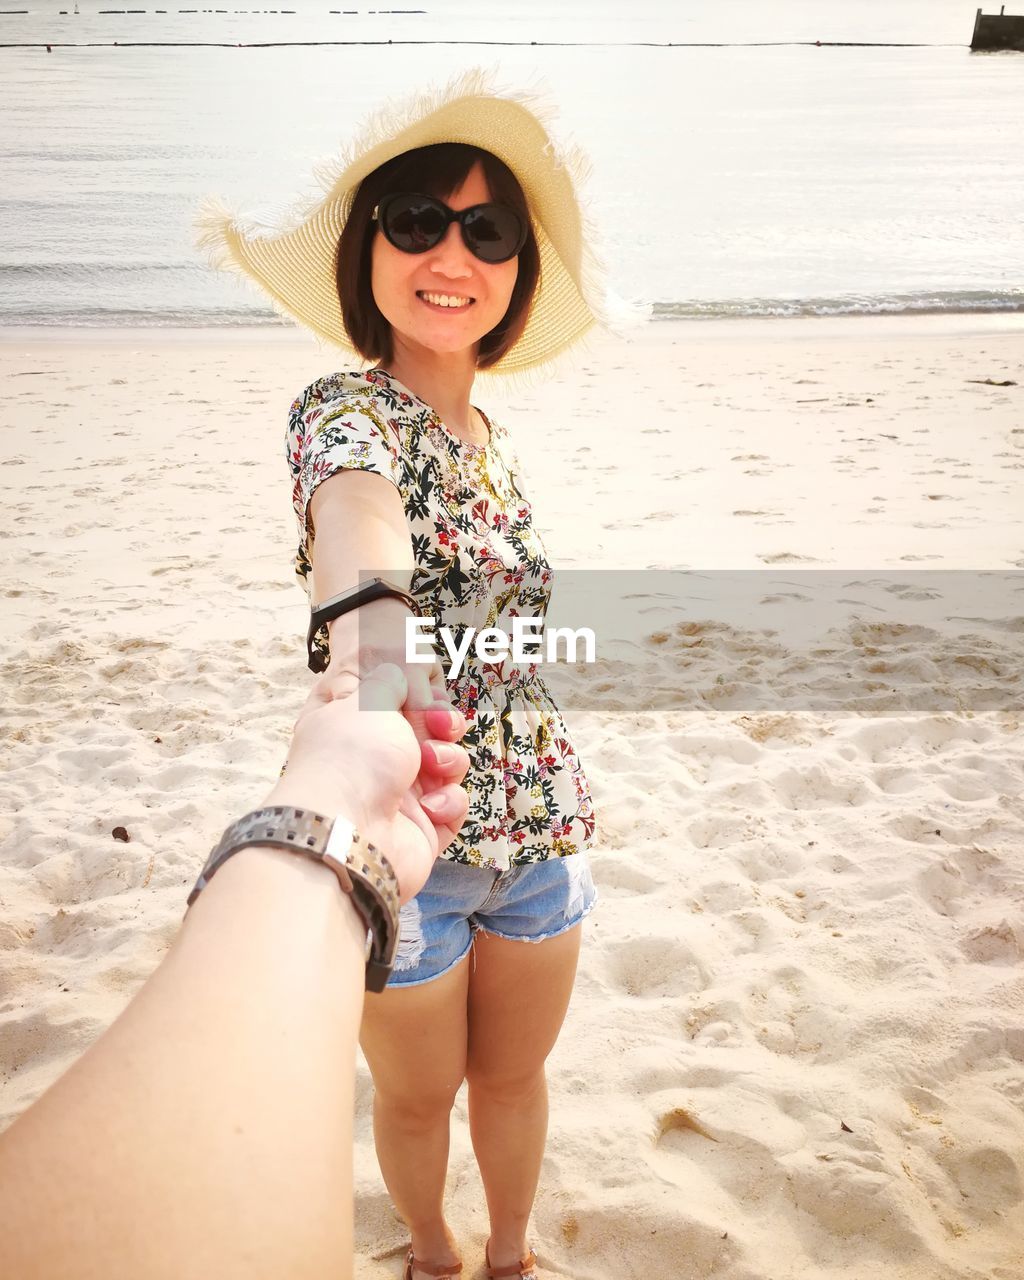 Portrait of woman holding man hand while wearing sunglasses on beach